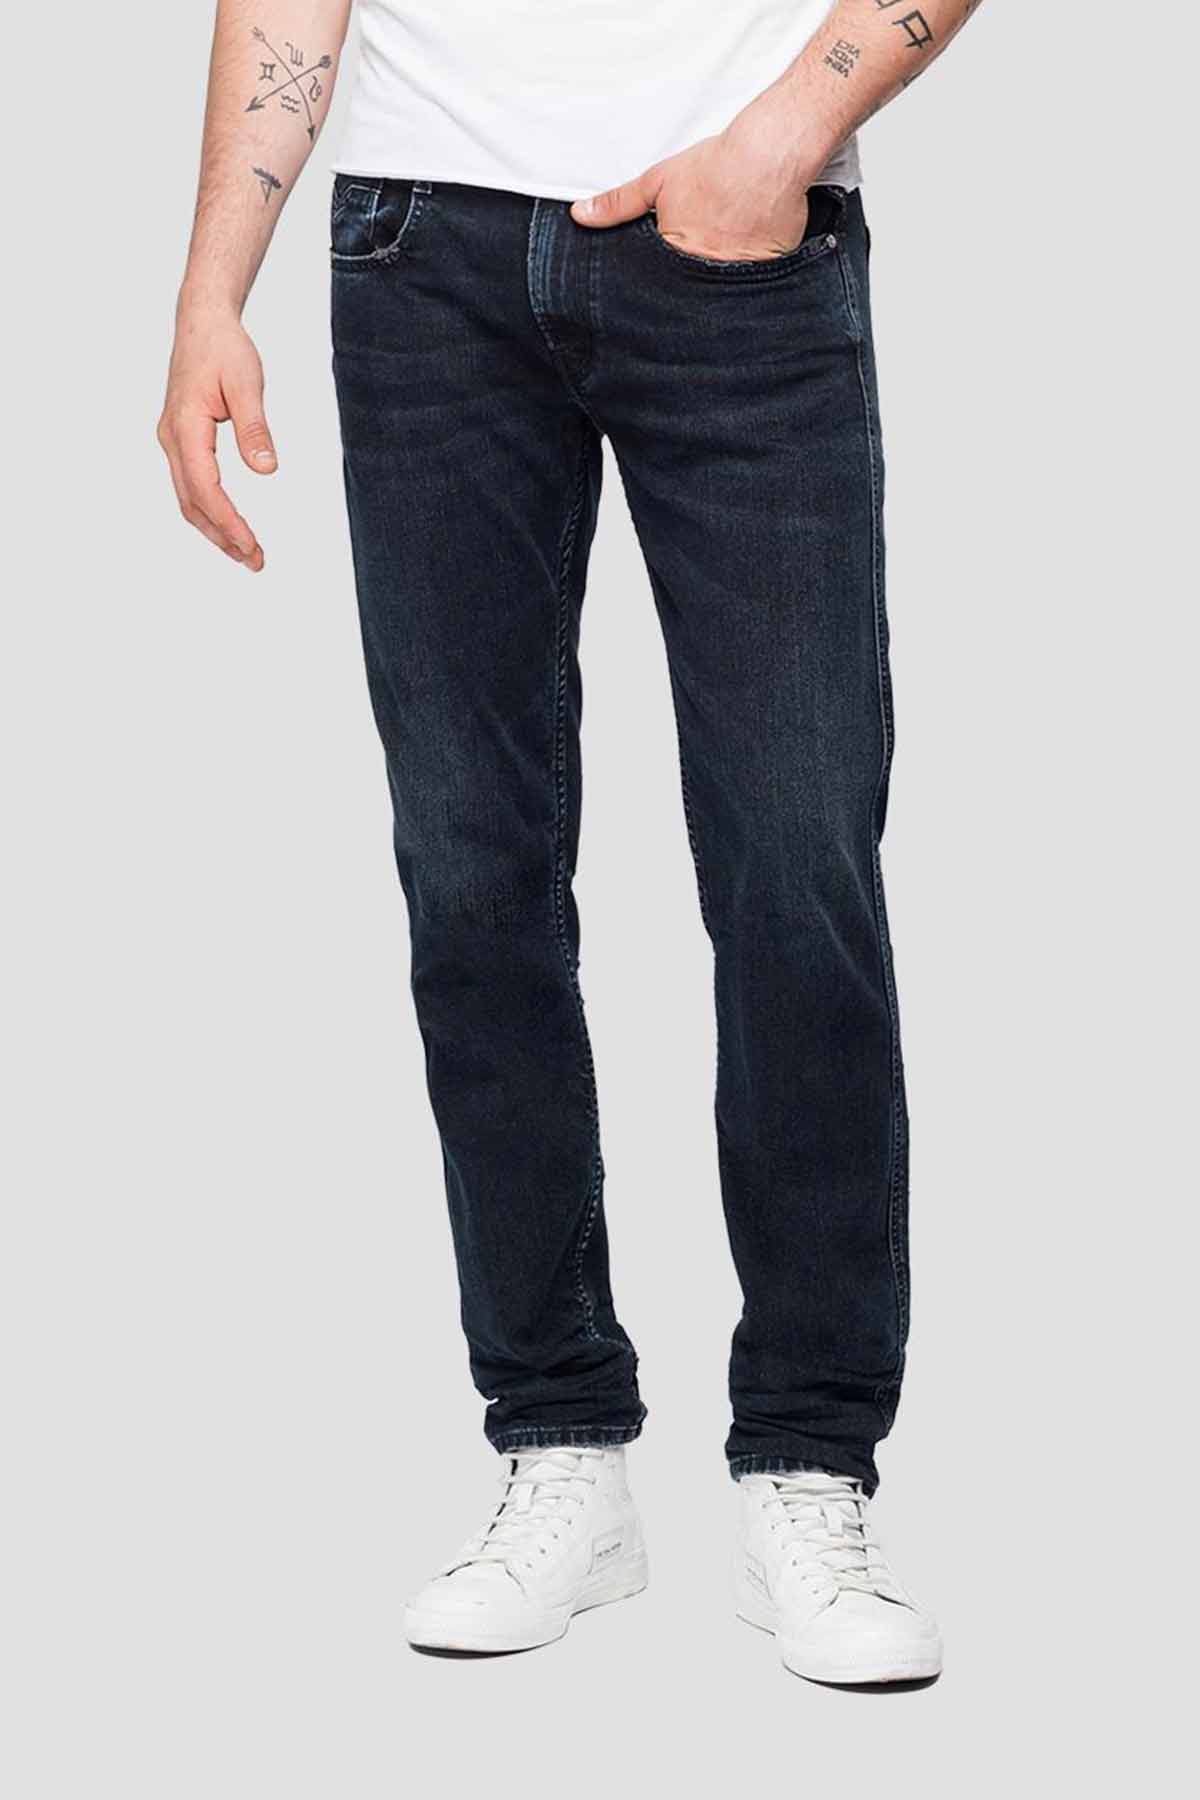 Replay Slim Fit Anbass Blue Black Overdyed Jeans-Libas Trendy Fashion Store